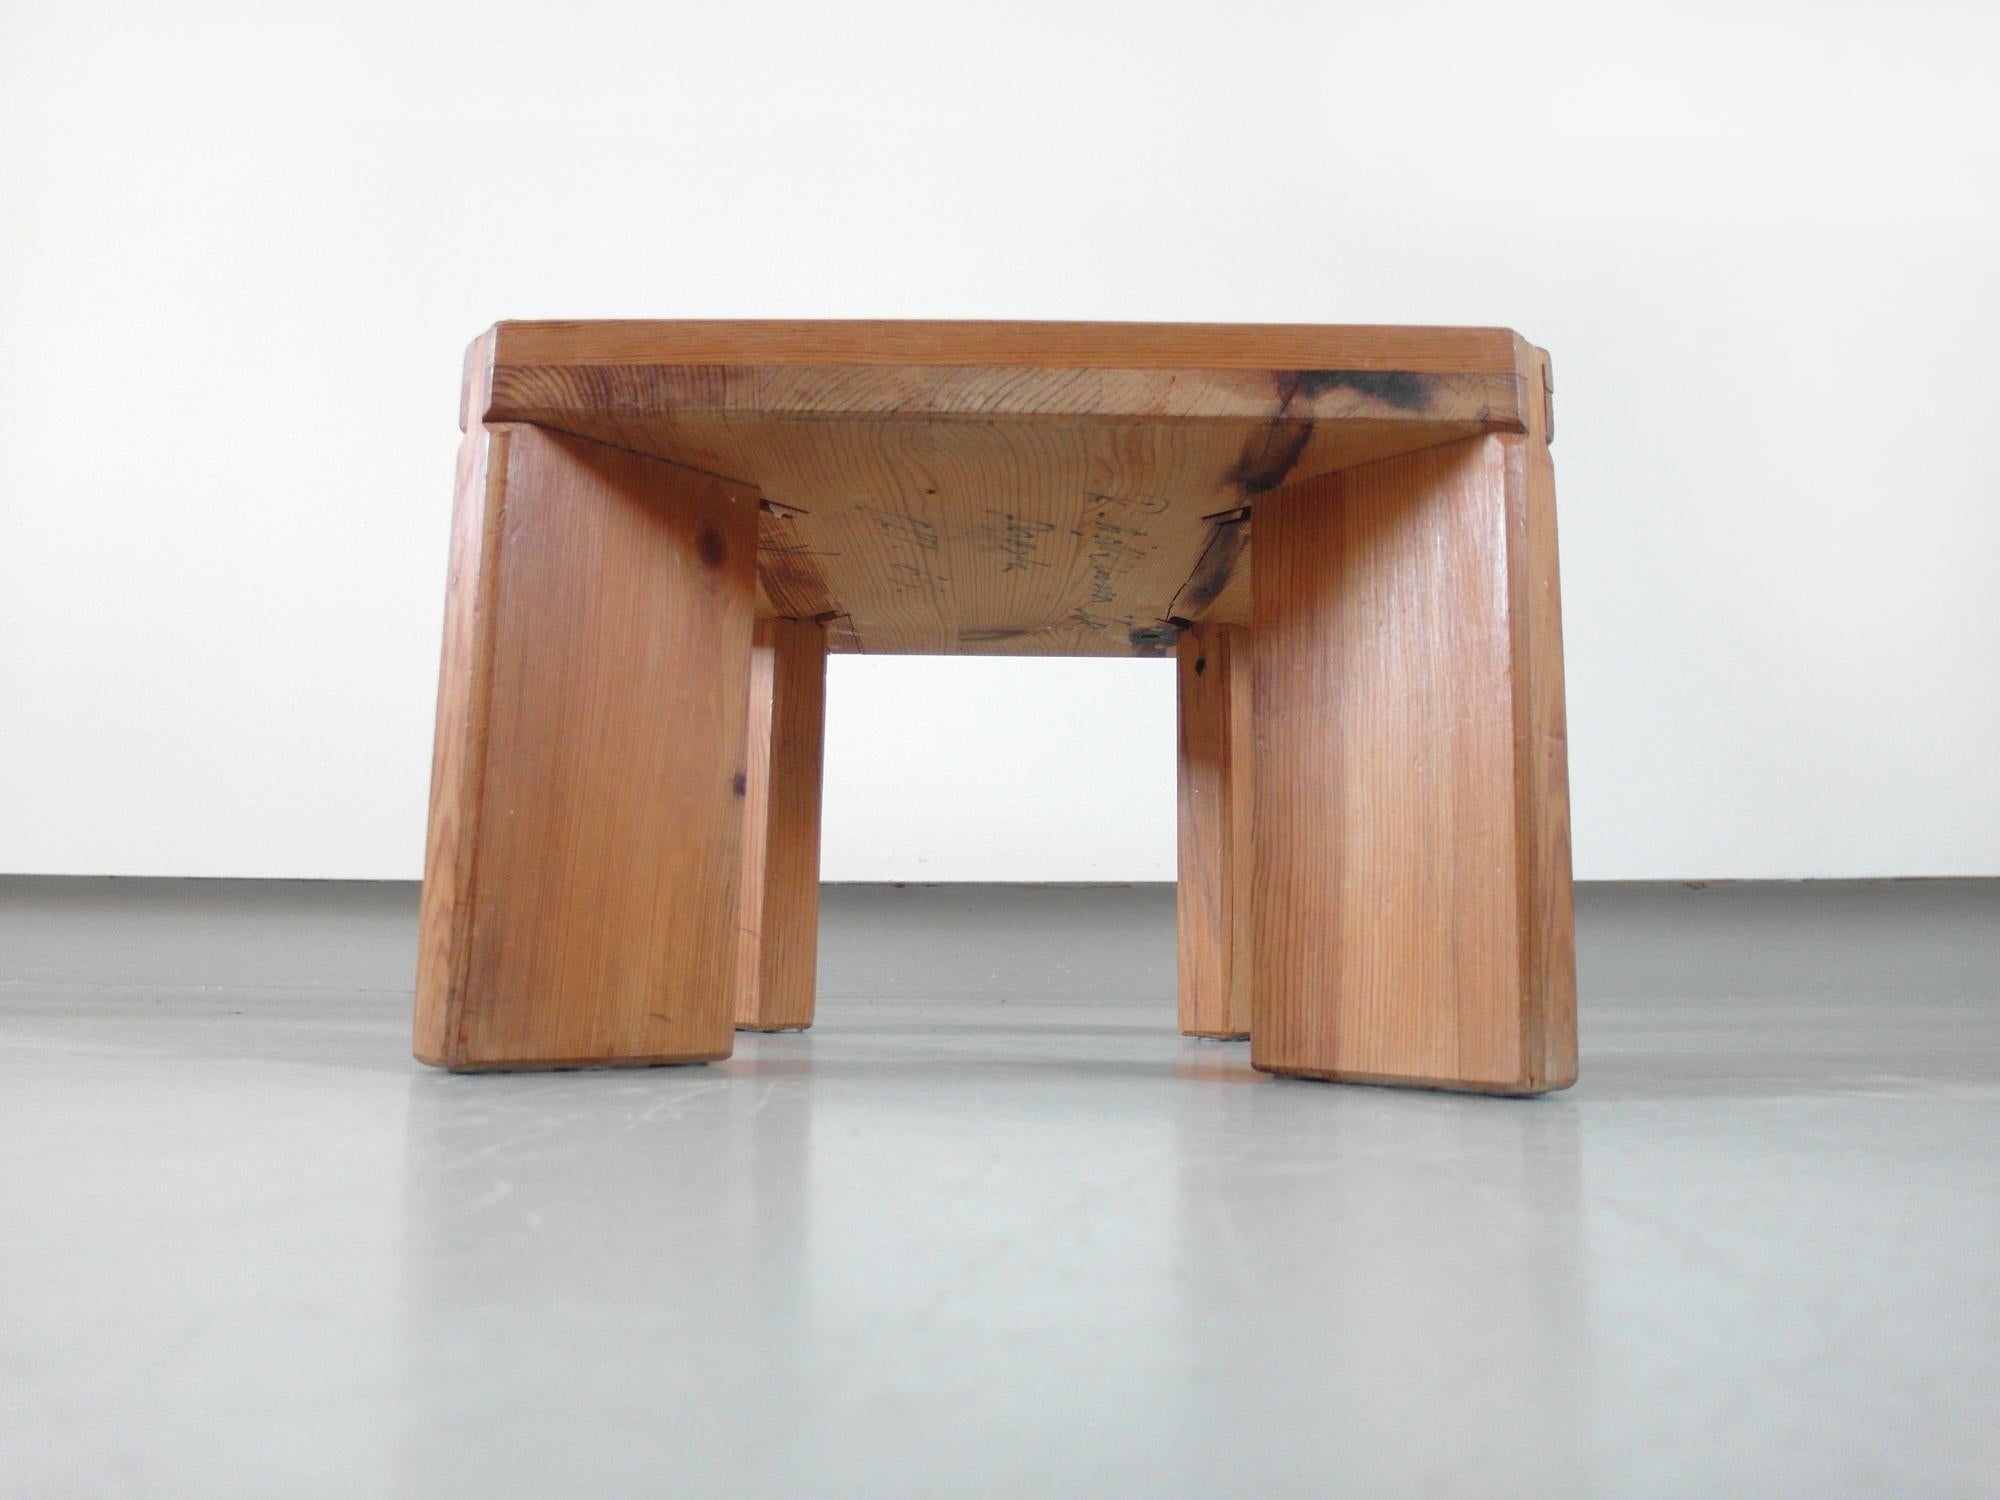 Roland Wilhelmsson, Unique Pair of Signed Stools, Studio of Artist 1965 and 1970 For Sale 3